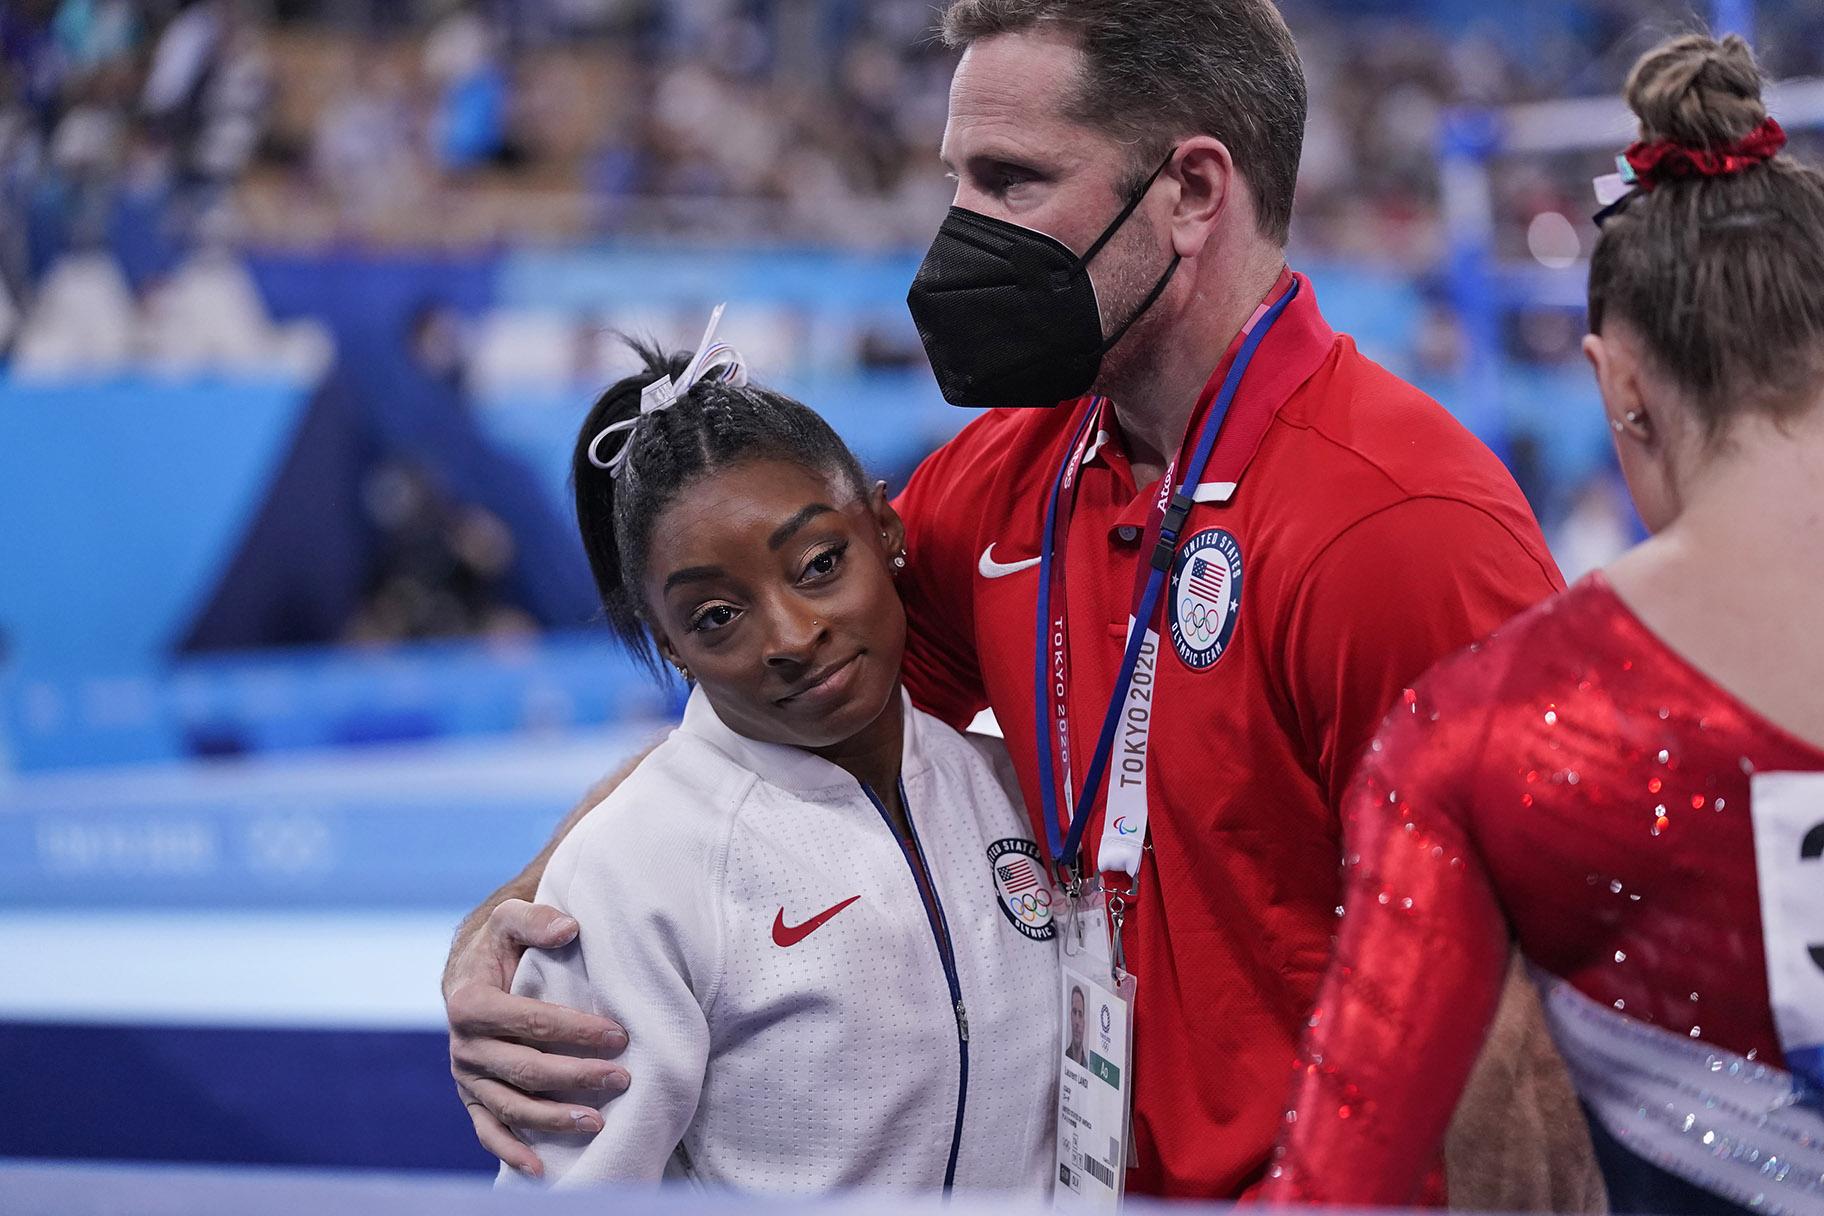 Coach Laurent Landi embraces Simone Biles, after she exited the team final with apparent injury, at the 2020 Summer Olympics, Tuesday, July 27, 2021, in Tokyo. (AP Photo / Gregory Bull)